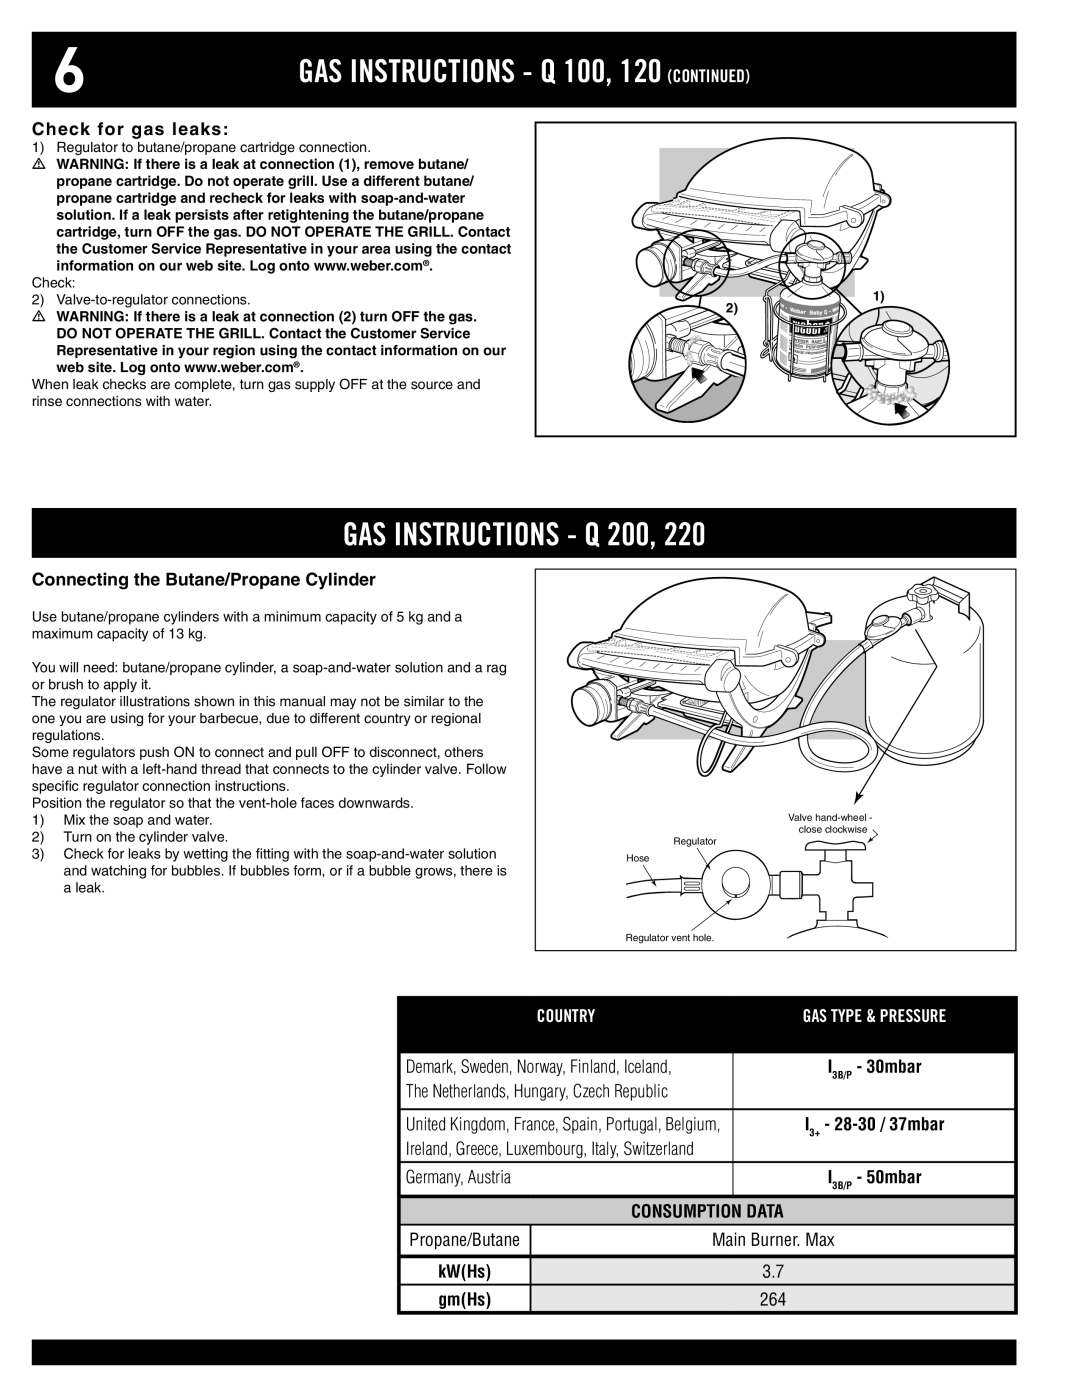 Weber 200, 220 owner manual Gas Instructions - Q, GAS INSTRUCTIONS - Q 100, 120 CONTINUED, Country, Gas type & pressure 